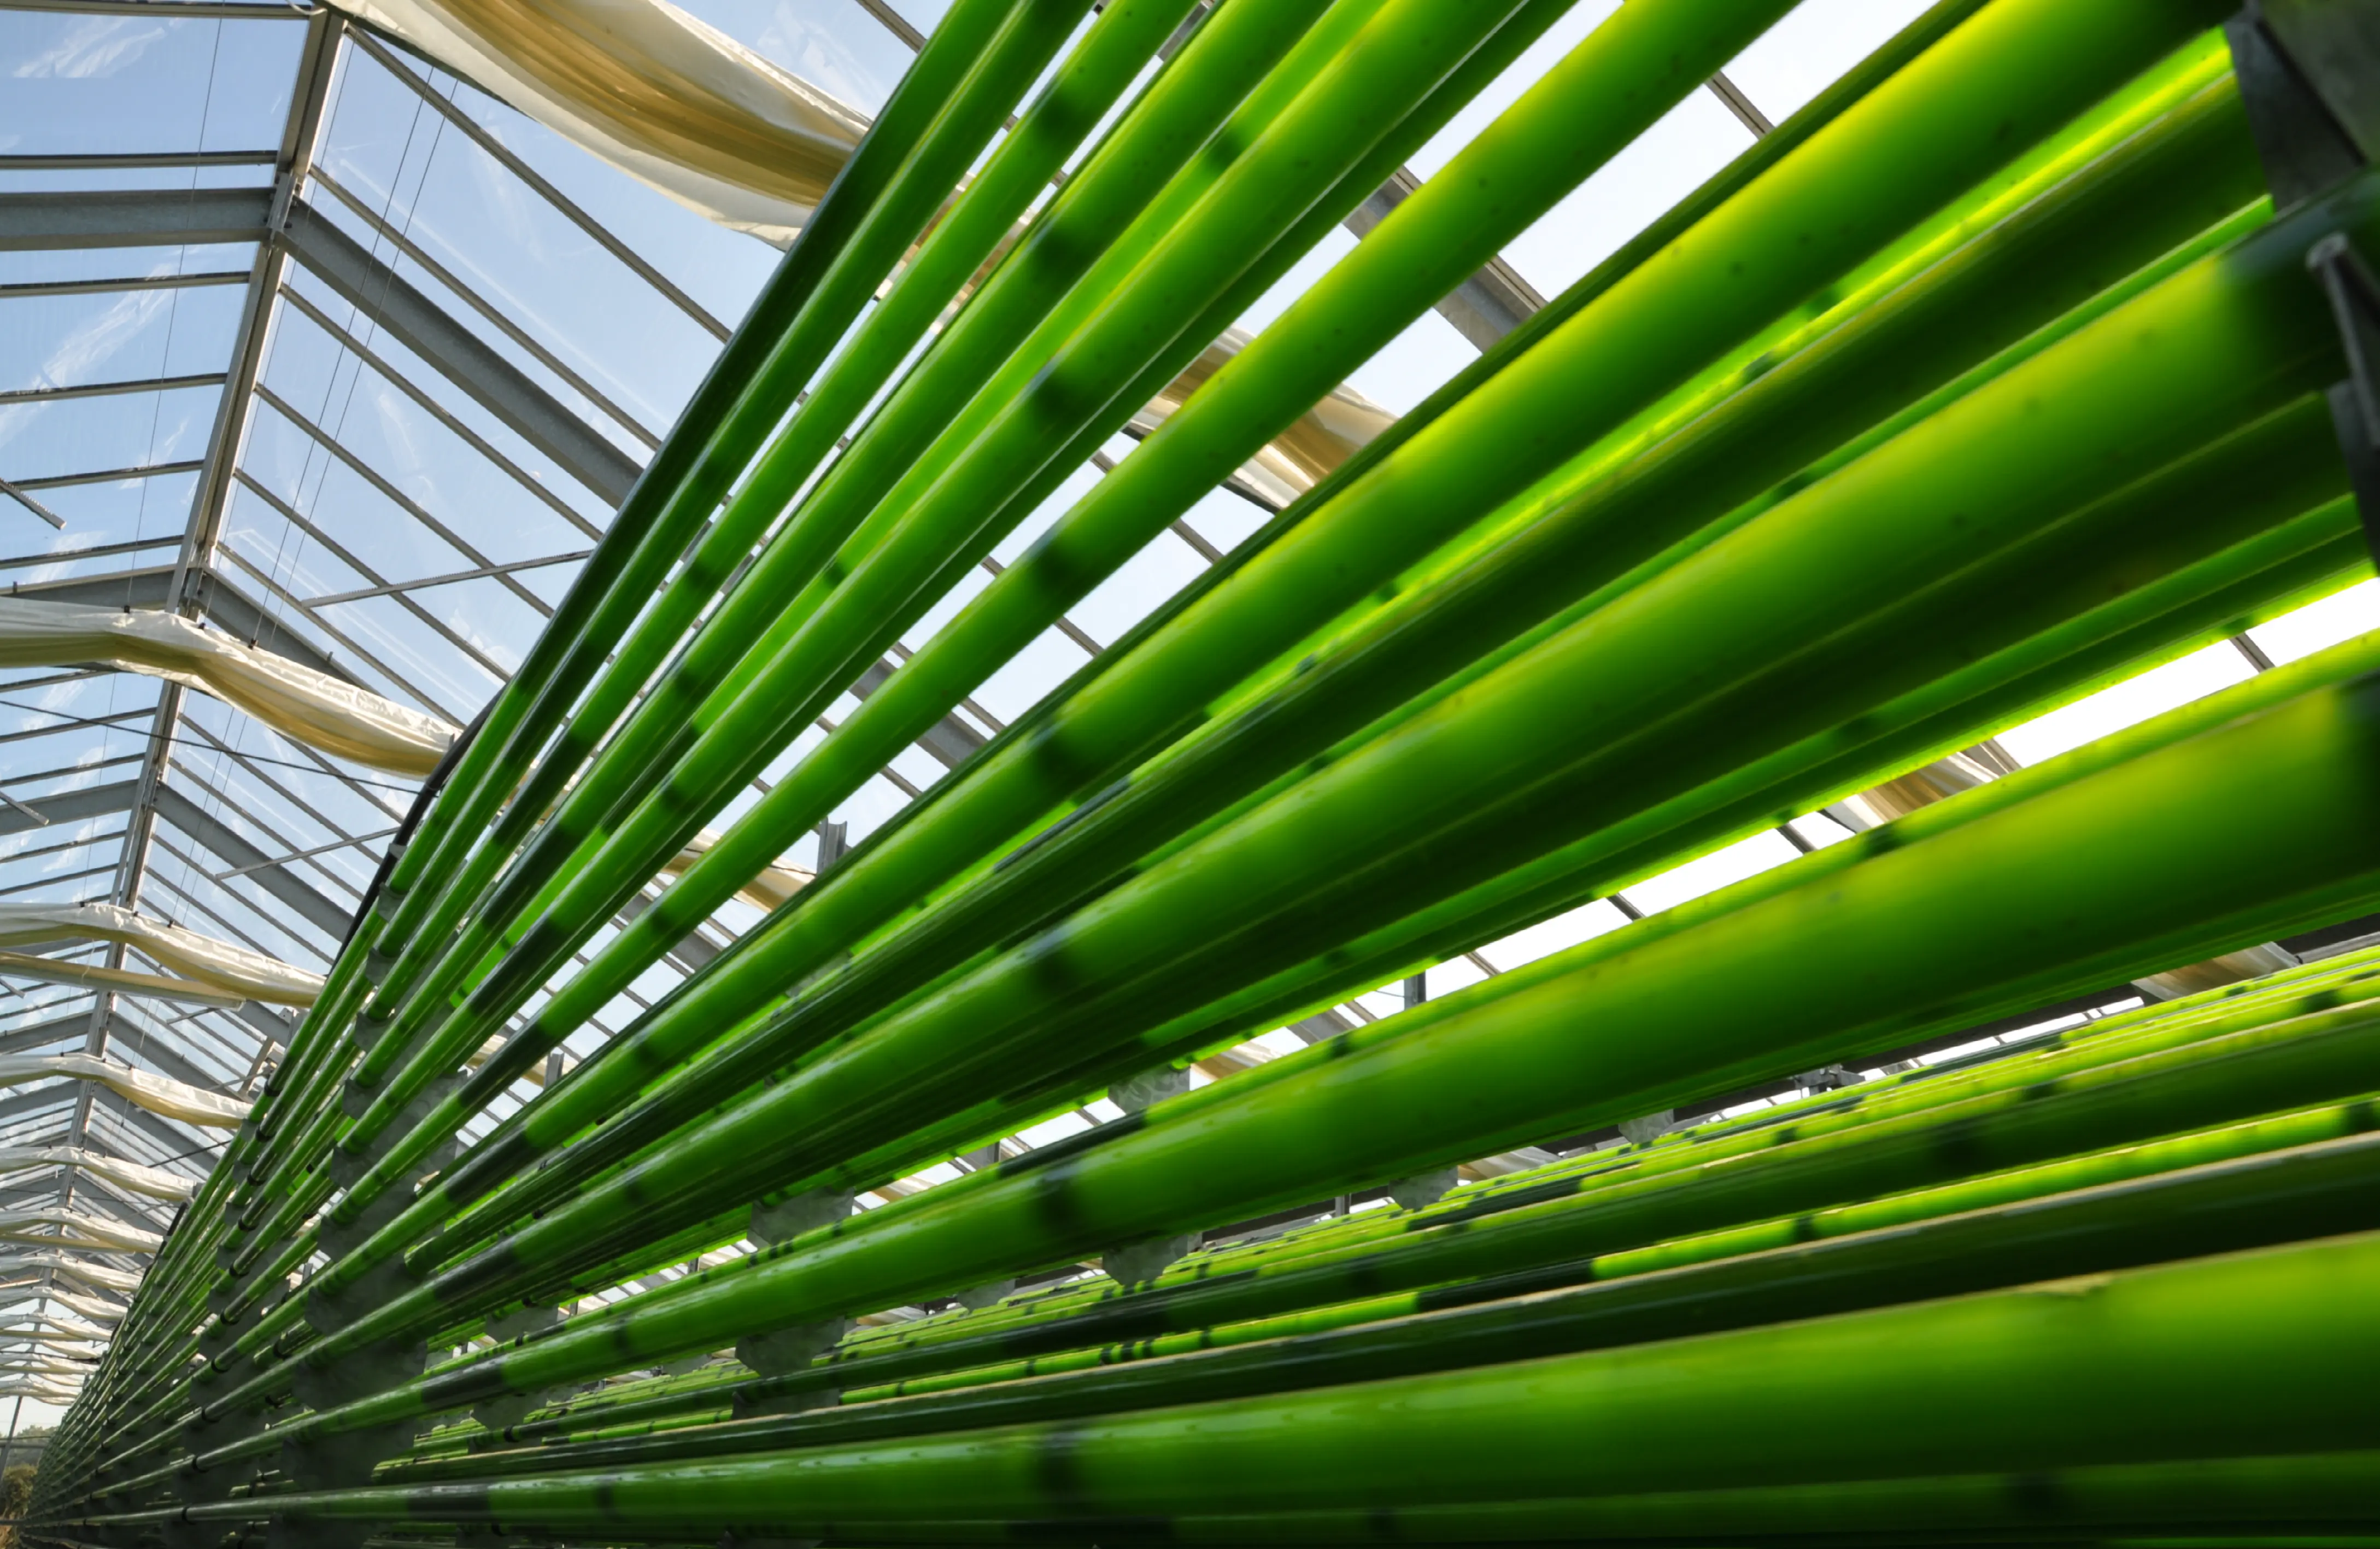 In the water-filled tubes of the photobioreactors, microalgae grow under optimum conditions, while fresh water use can be considerably reduced.